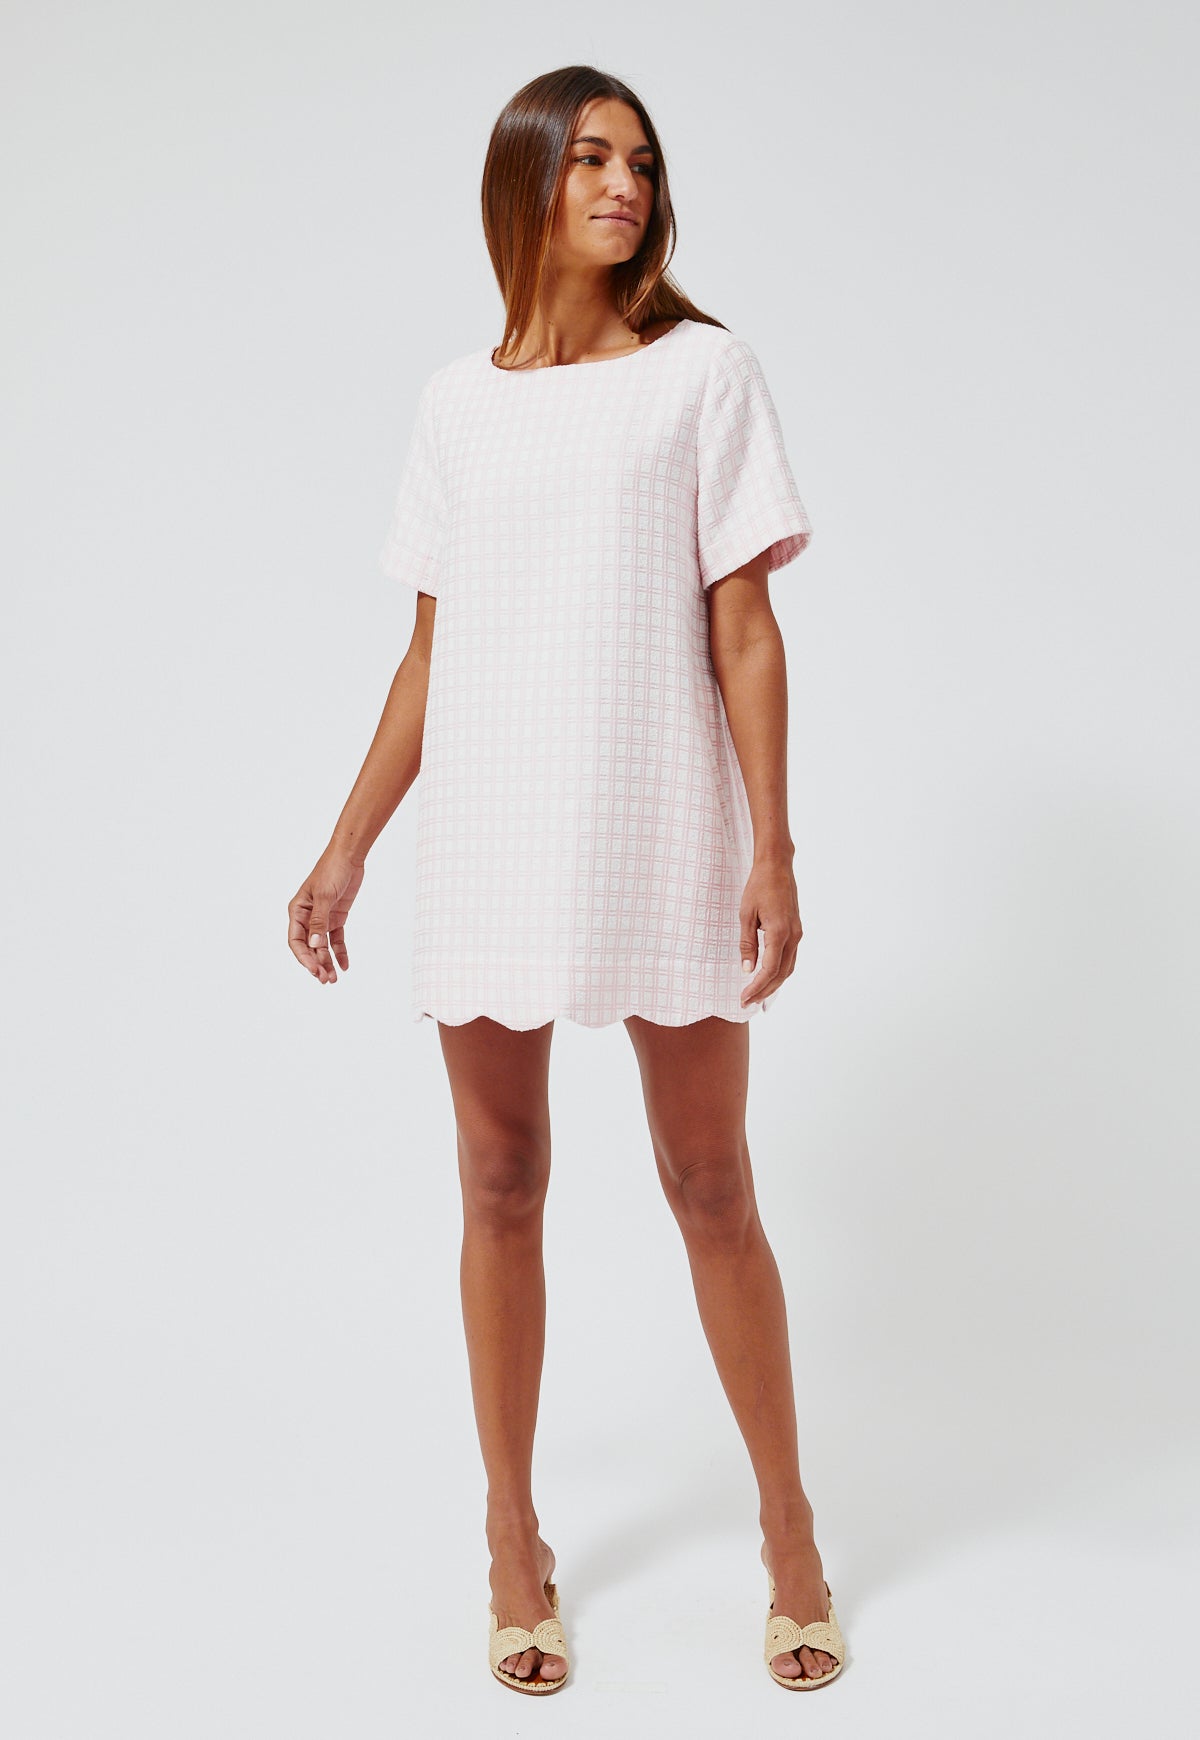 THE SCALLOP  A-LINE MINI DRESS in PINK CHECK BOUCLE COTTON